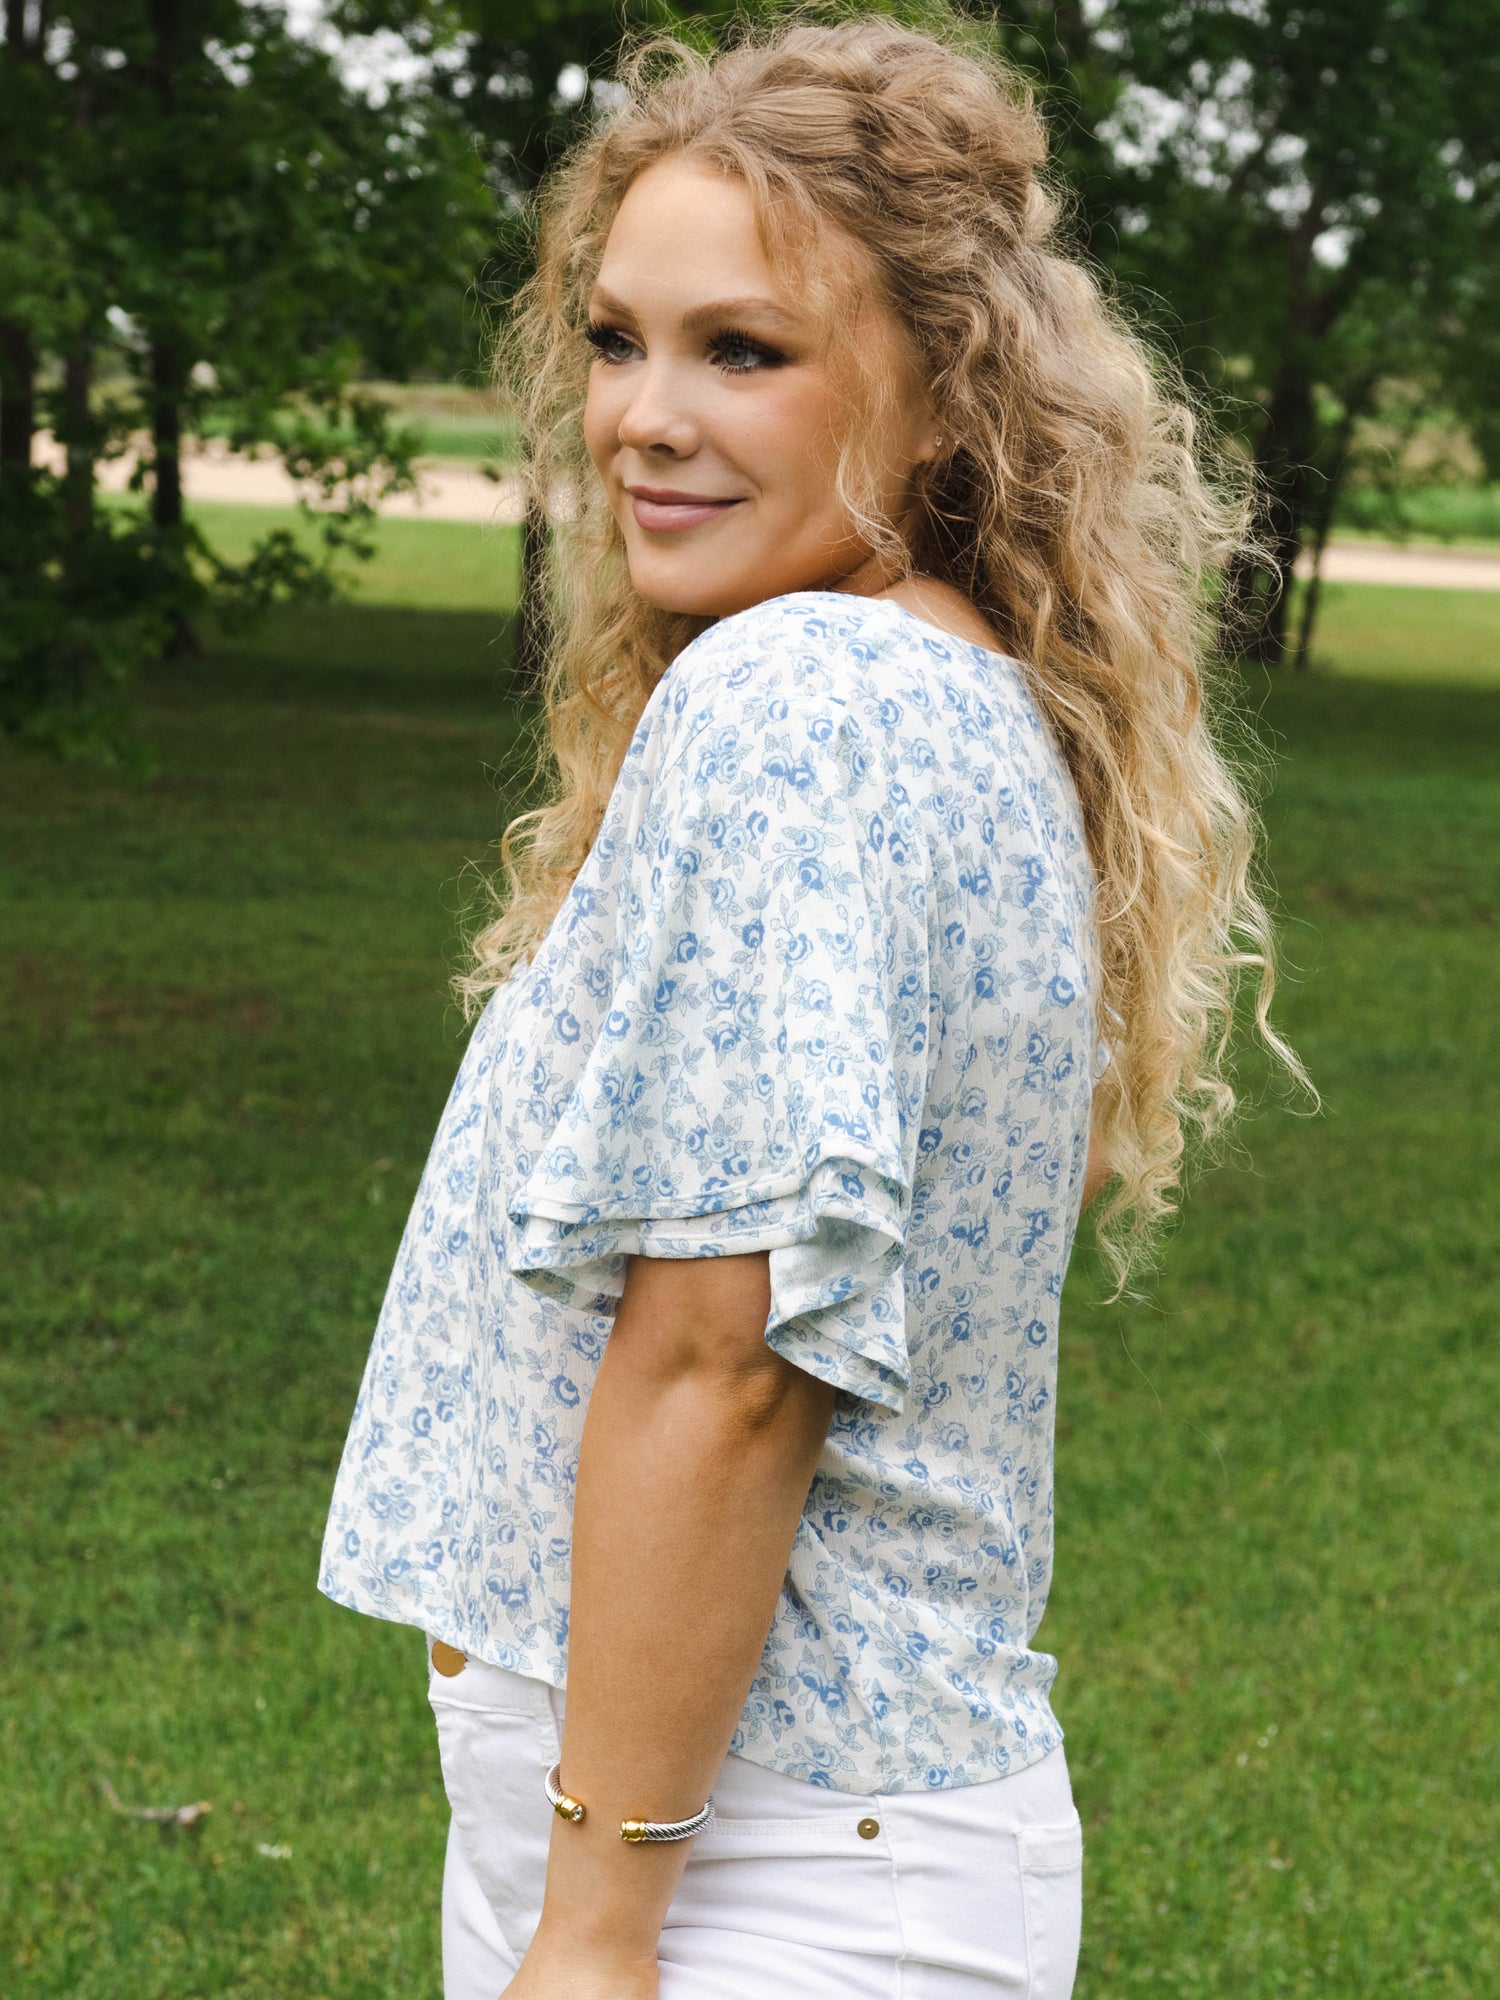 This image of a woman features the product Classic Flutter Top - Blue Jay Floral. This top has a keyhole back and flowy double ruffle sleeves. It is a blue rose pattern on a pale background.